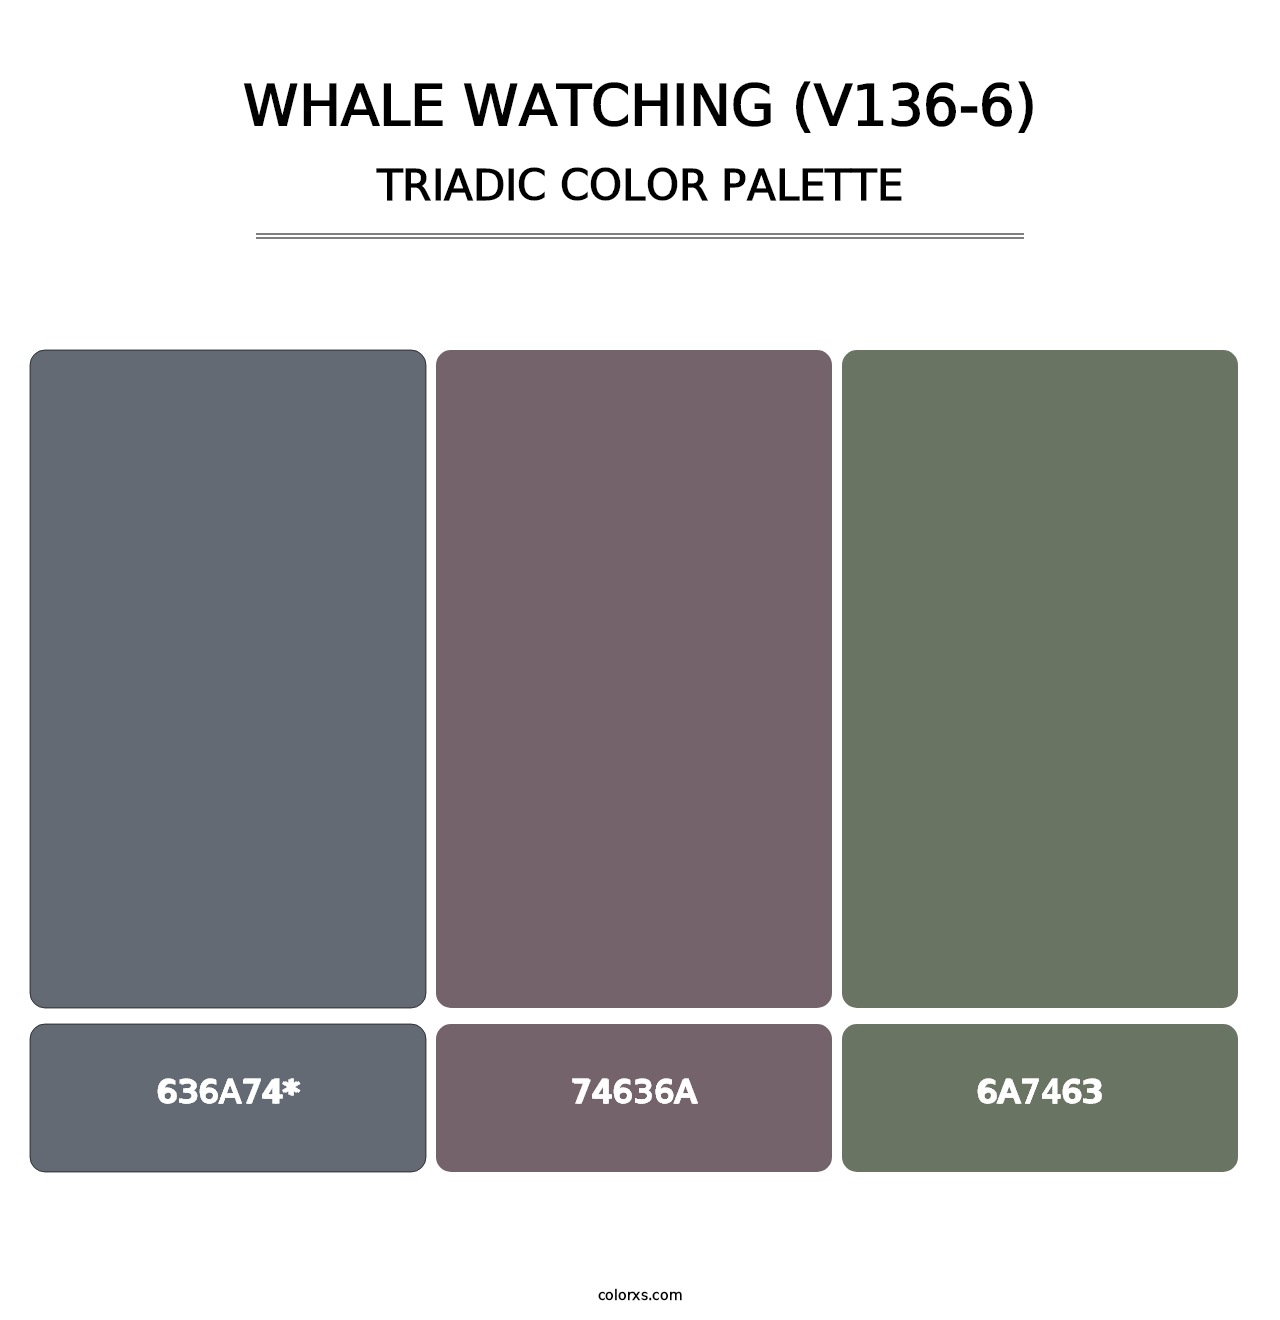 Whale Watching (V136-6) - Triadic Color Palette